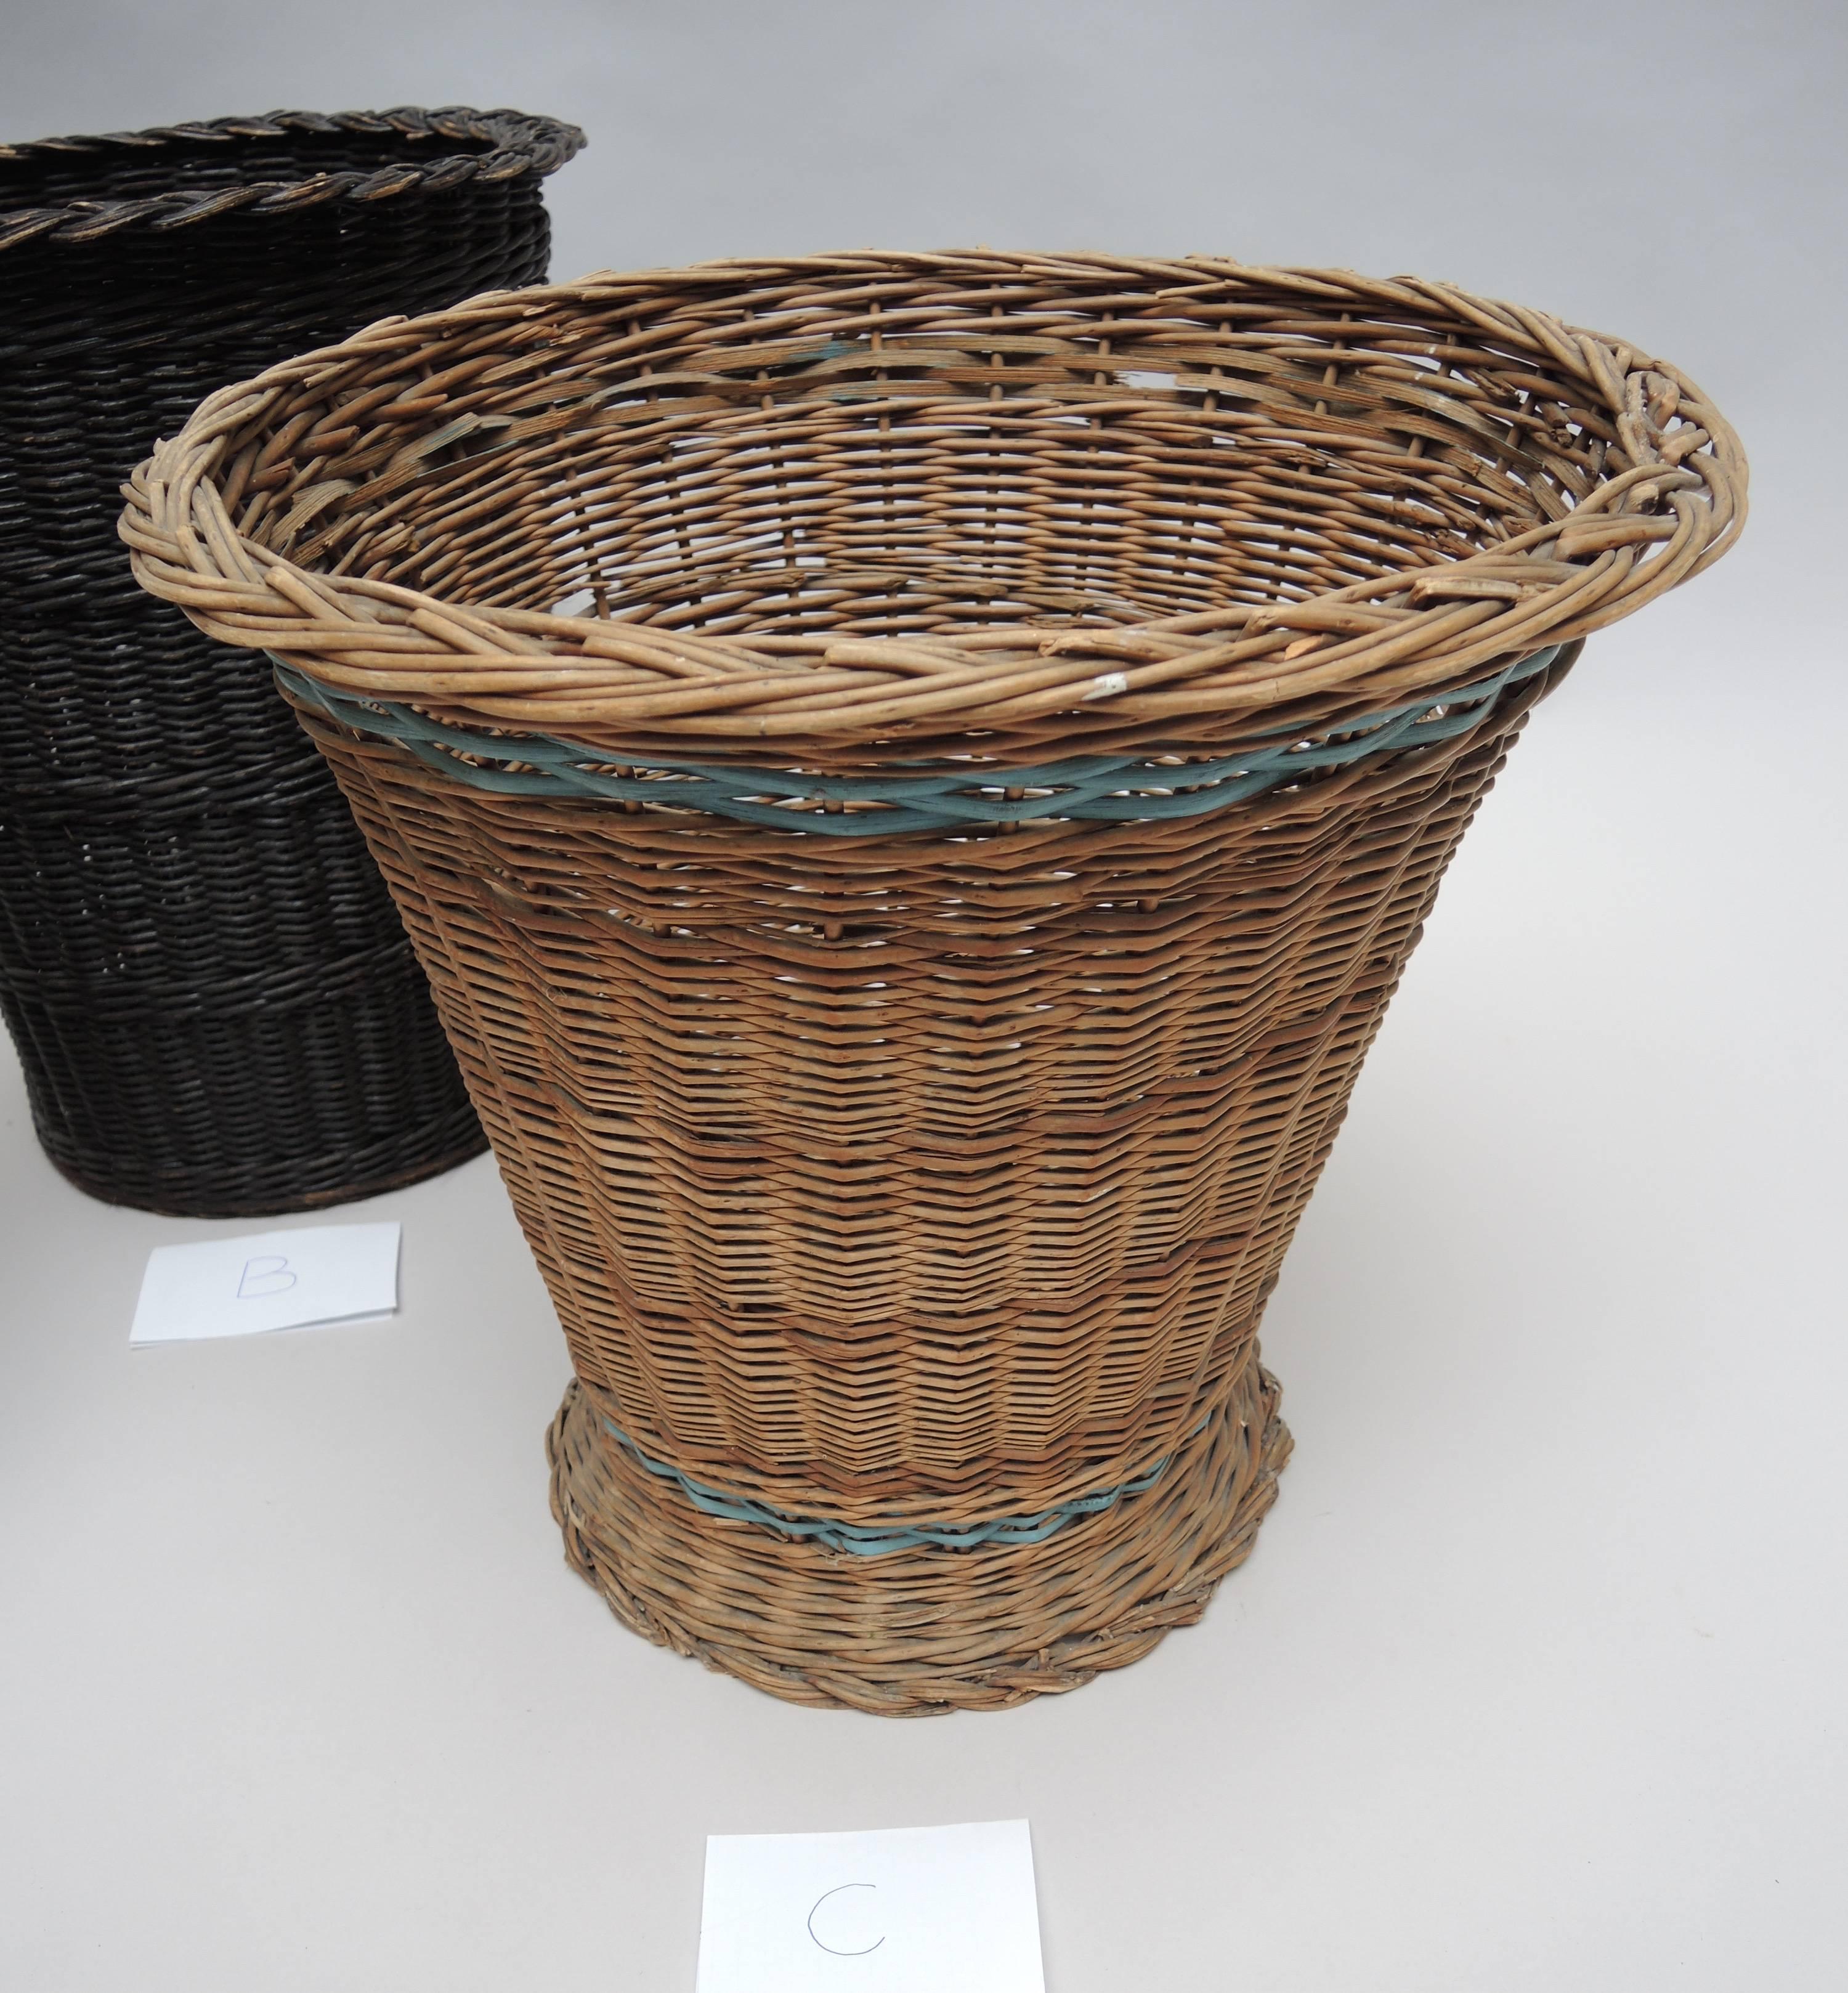  French woven wicker trash can circa 1940. 
Natural woven wicker & blue painted wicker  woven on top and bottom to create a stripe.


 